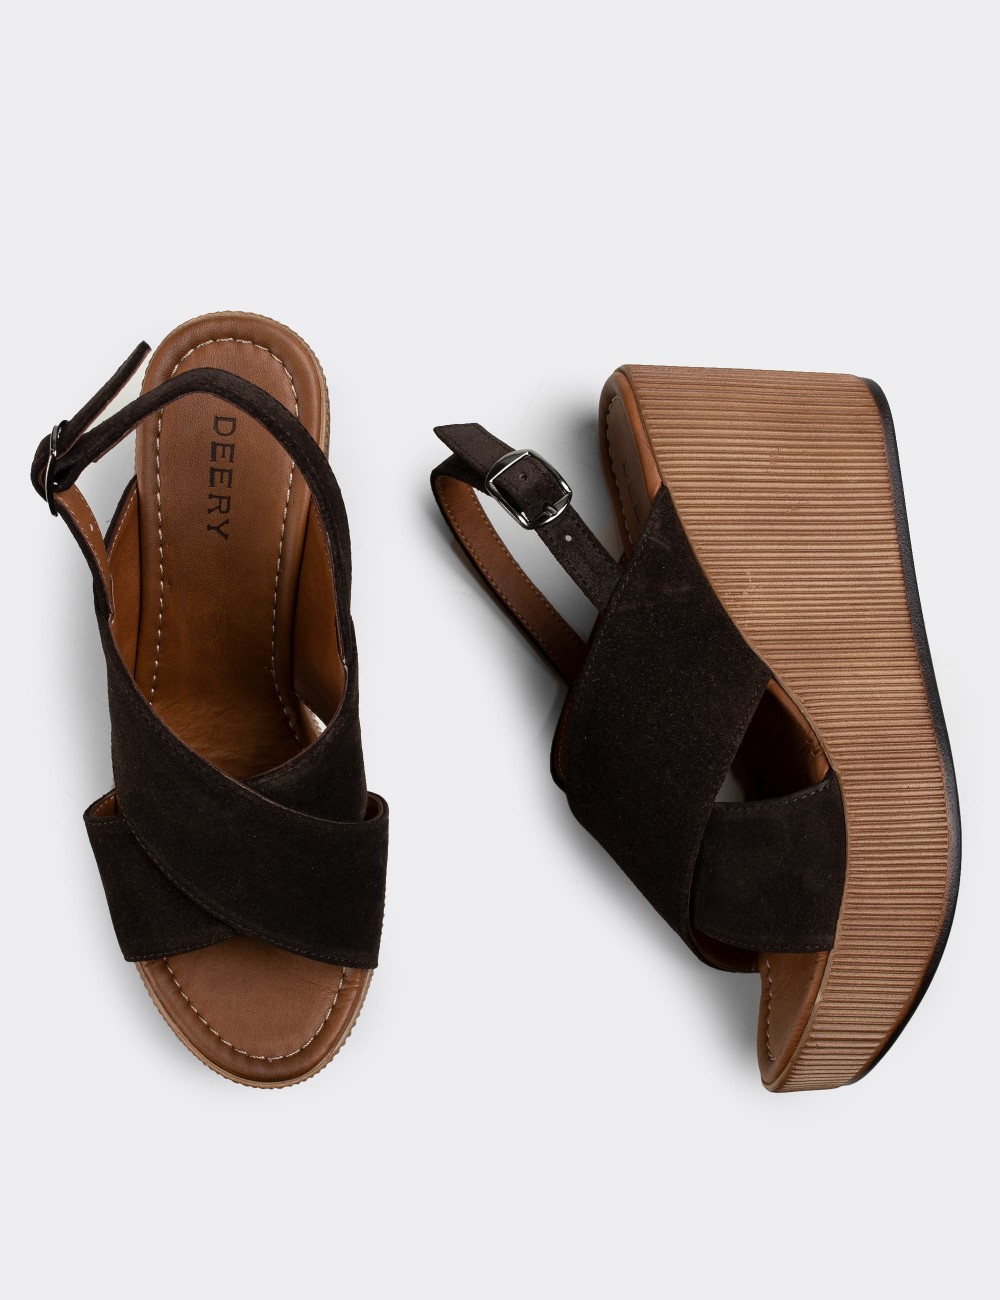 Brown Suede Leather Sandals - E6174ZKHVC01